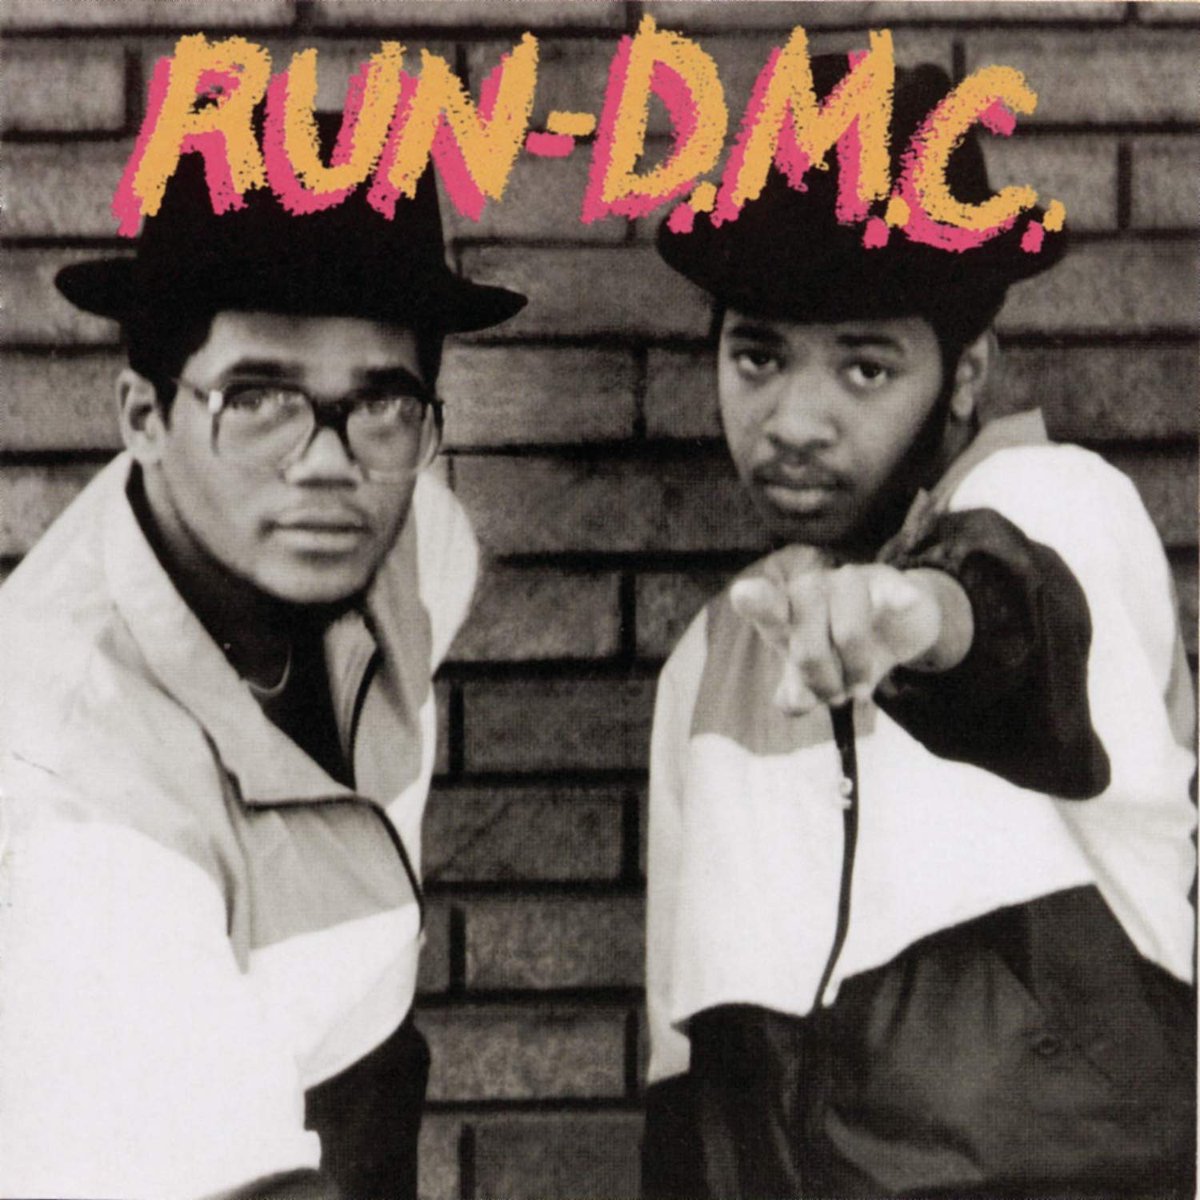 1984. Rock Steady Crew (Ready For Battle), World Famous Supreme Team (Hey DJ 12"), Divine Sounds (What People Do For Money 12") were fun and exciting. But Run-D.M.C (self titled) was a game changer - raw, tough and confident. Them 808 beats!  #hiphop